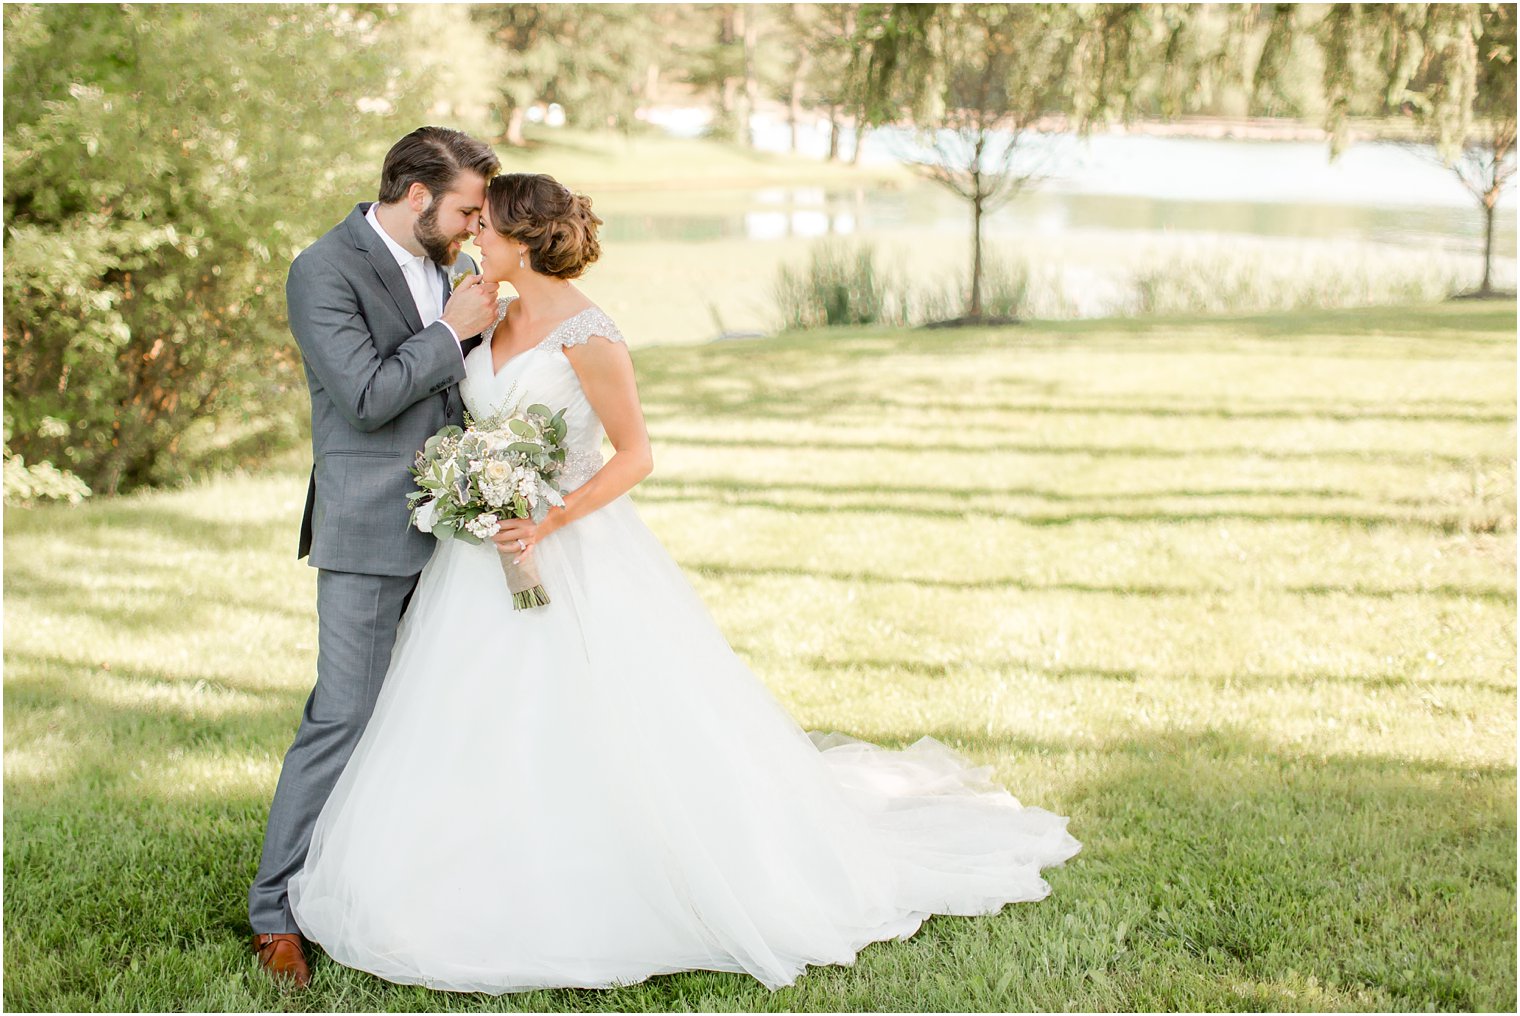 Sweet moment between bride and groom at Windows on the Water at Frogbridge Wedding